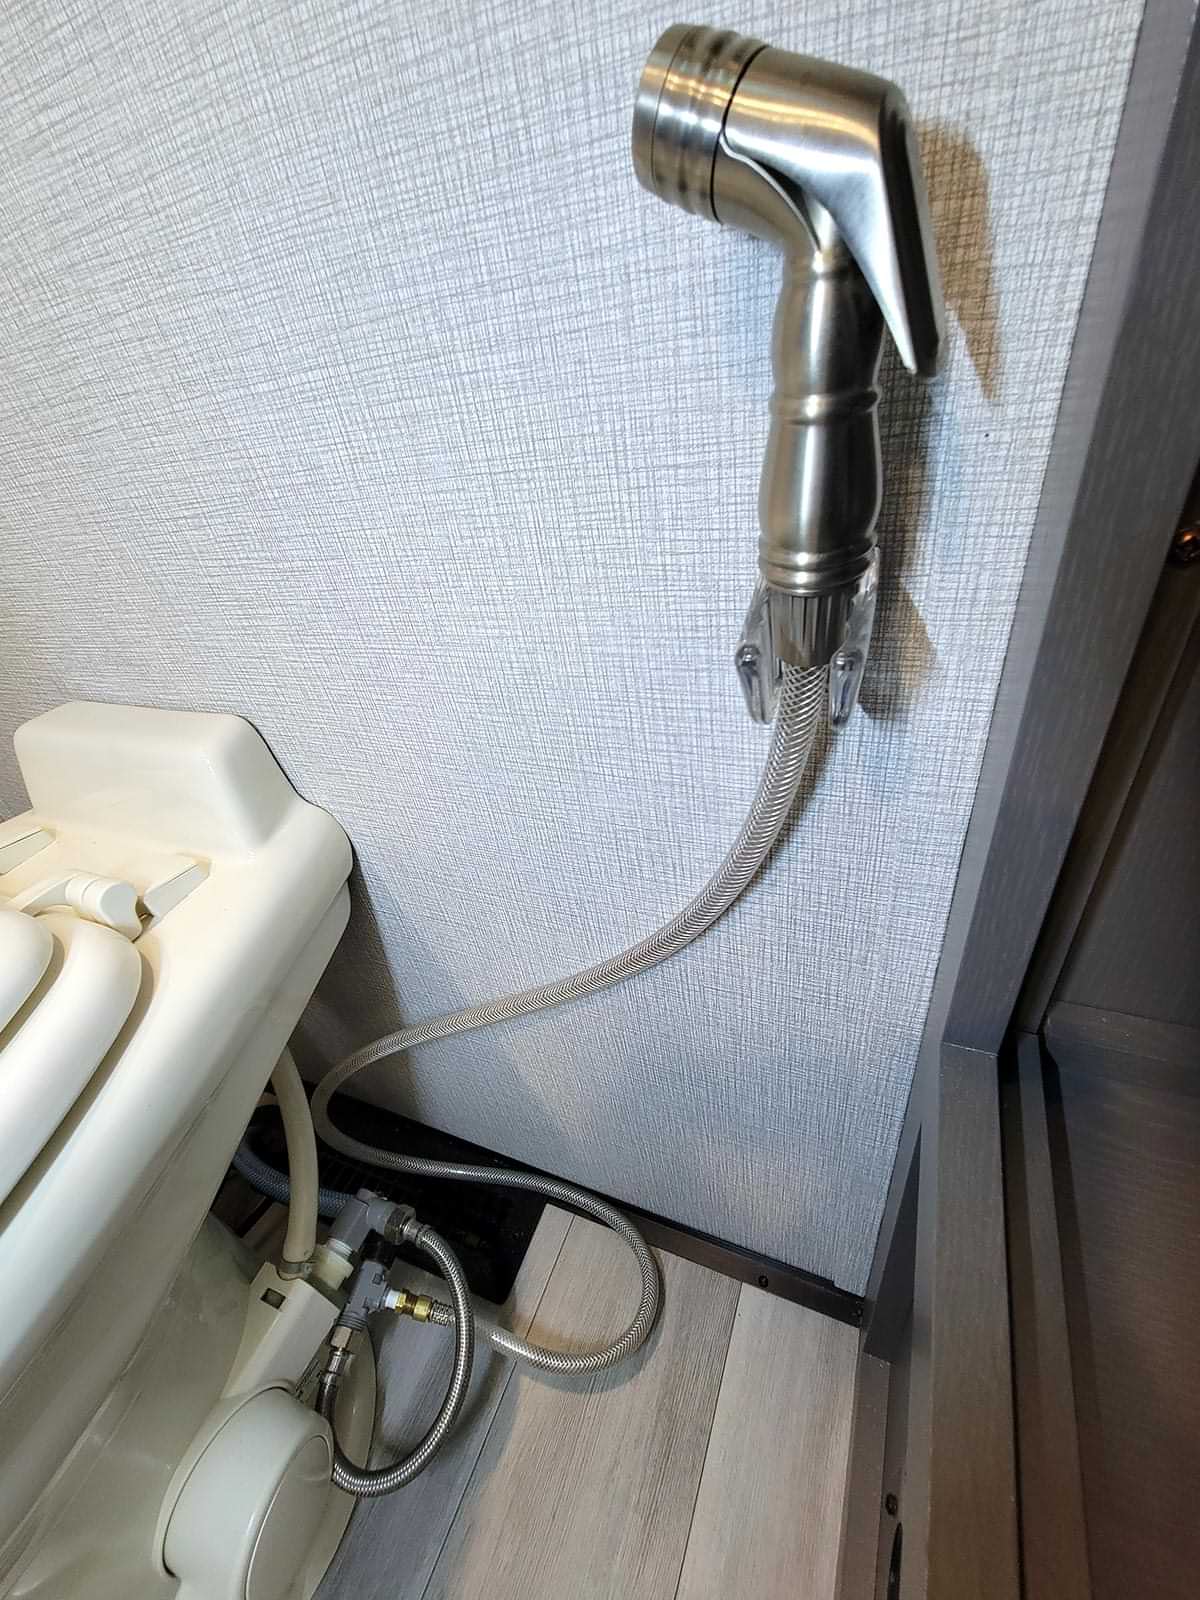 the RV toilet spray head is secured to a wall with a bracket commonly used for shower heads